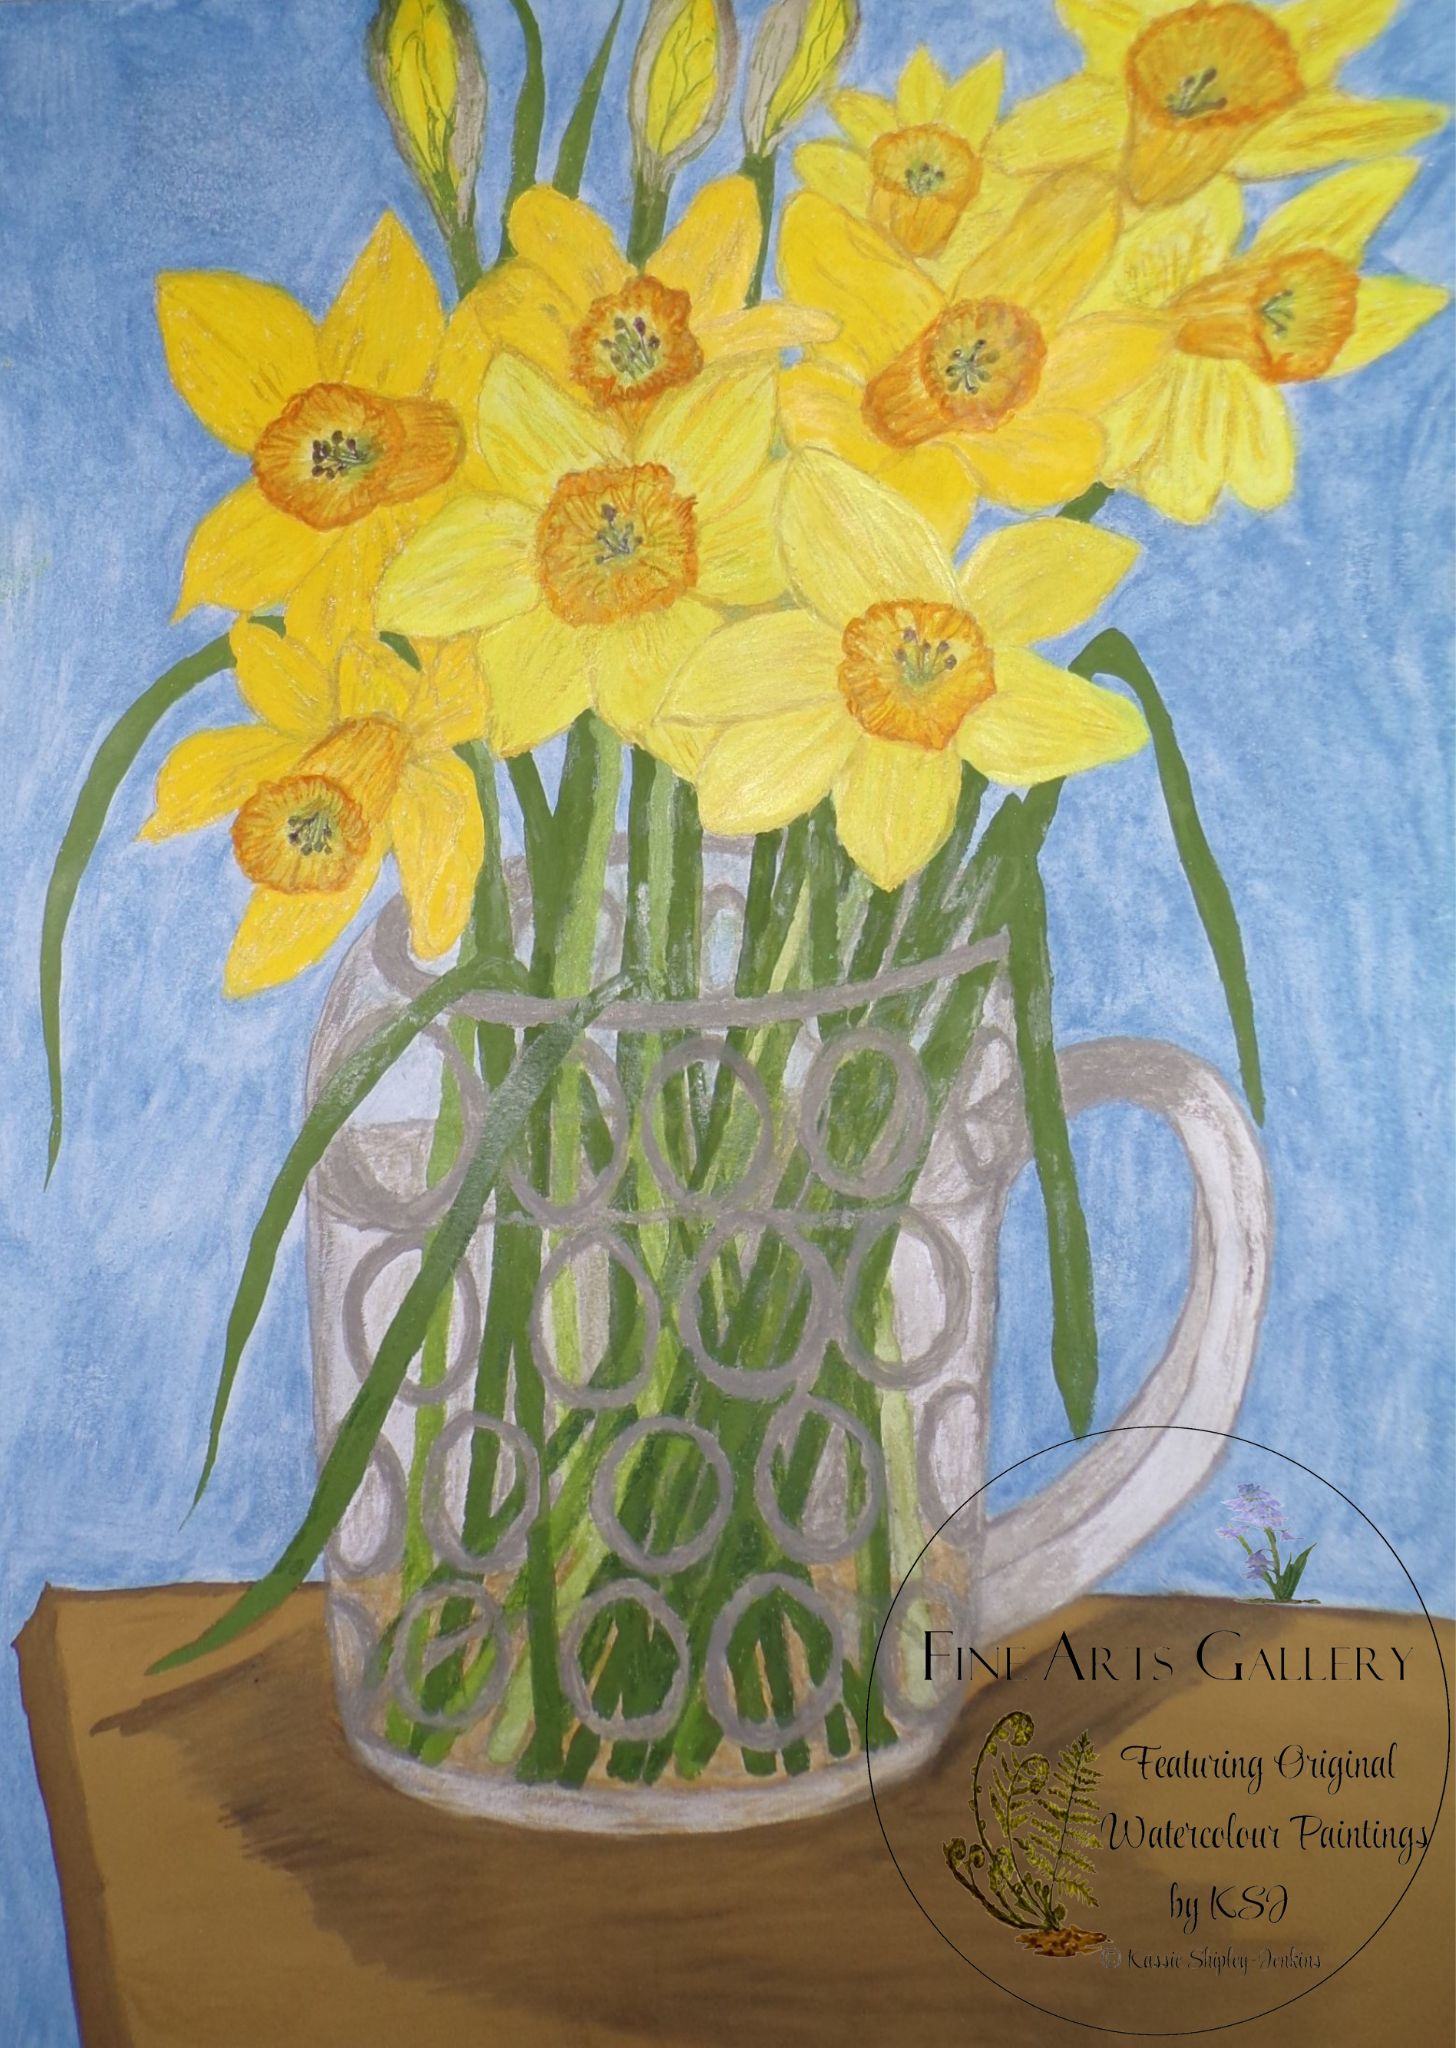 Florals, Daffodils in a Tankard, Original Painting by Kassie Shipley-Jenkins